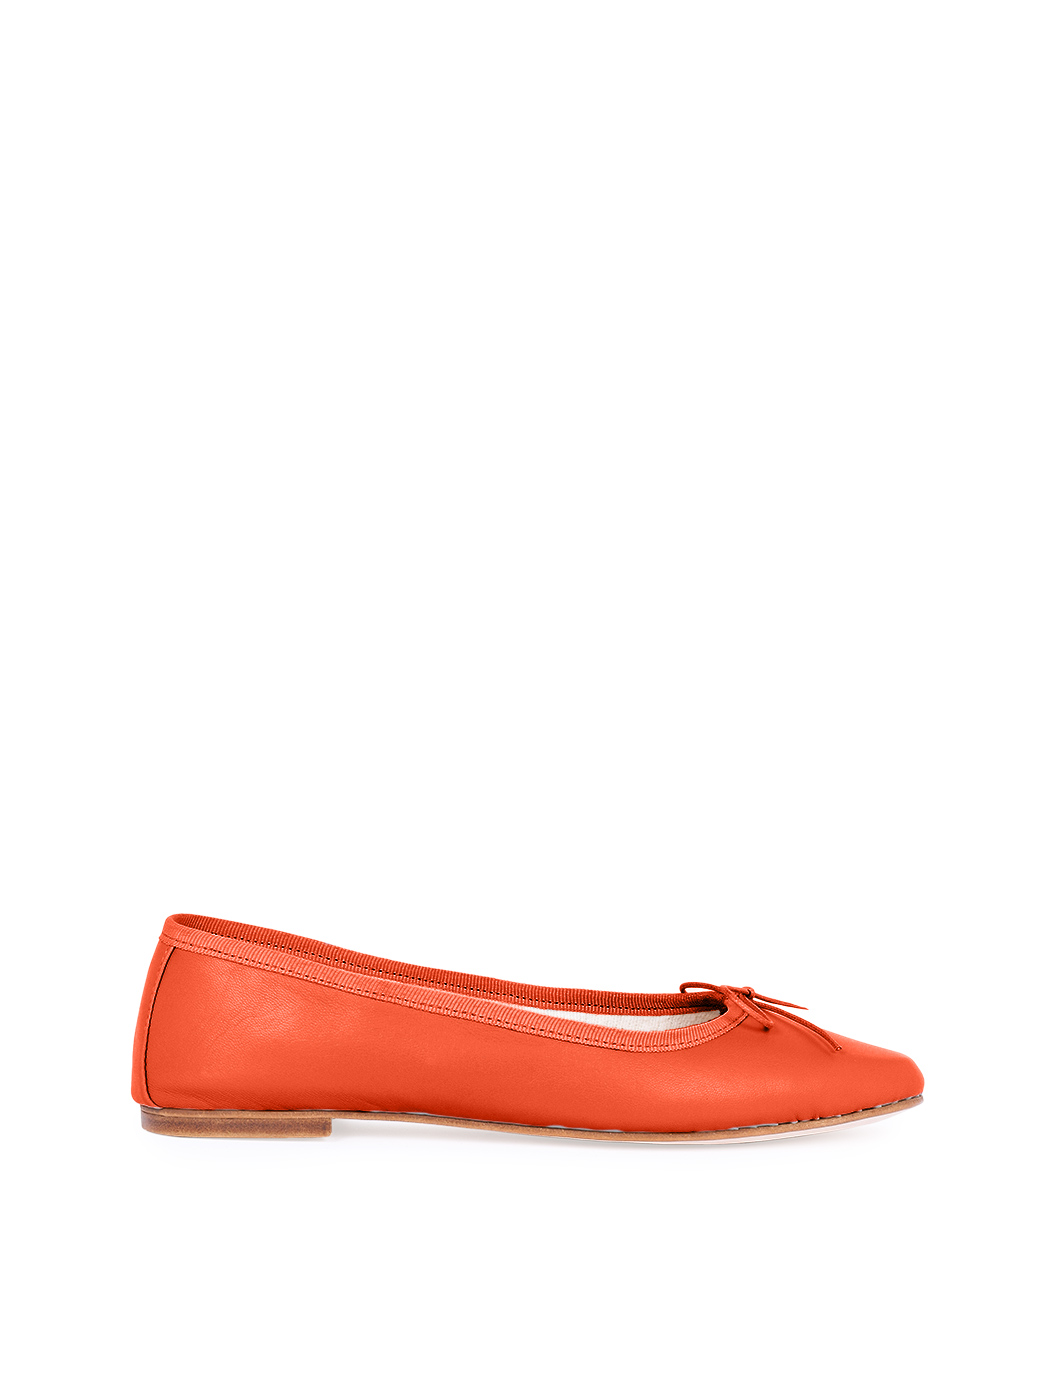 Ballerina Shoes - Red Nappa 